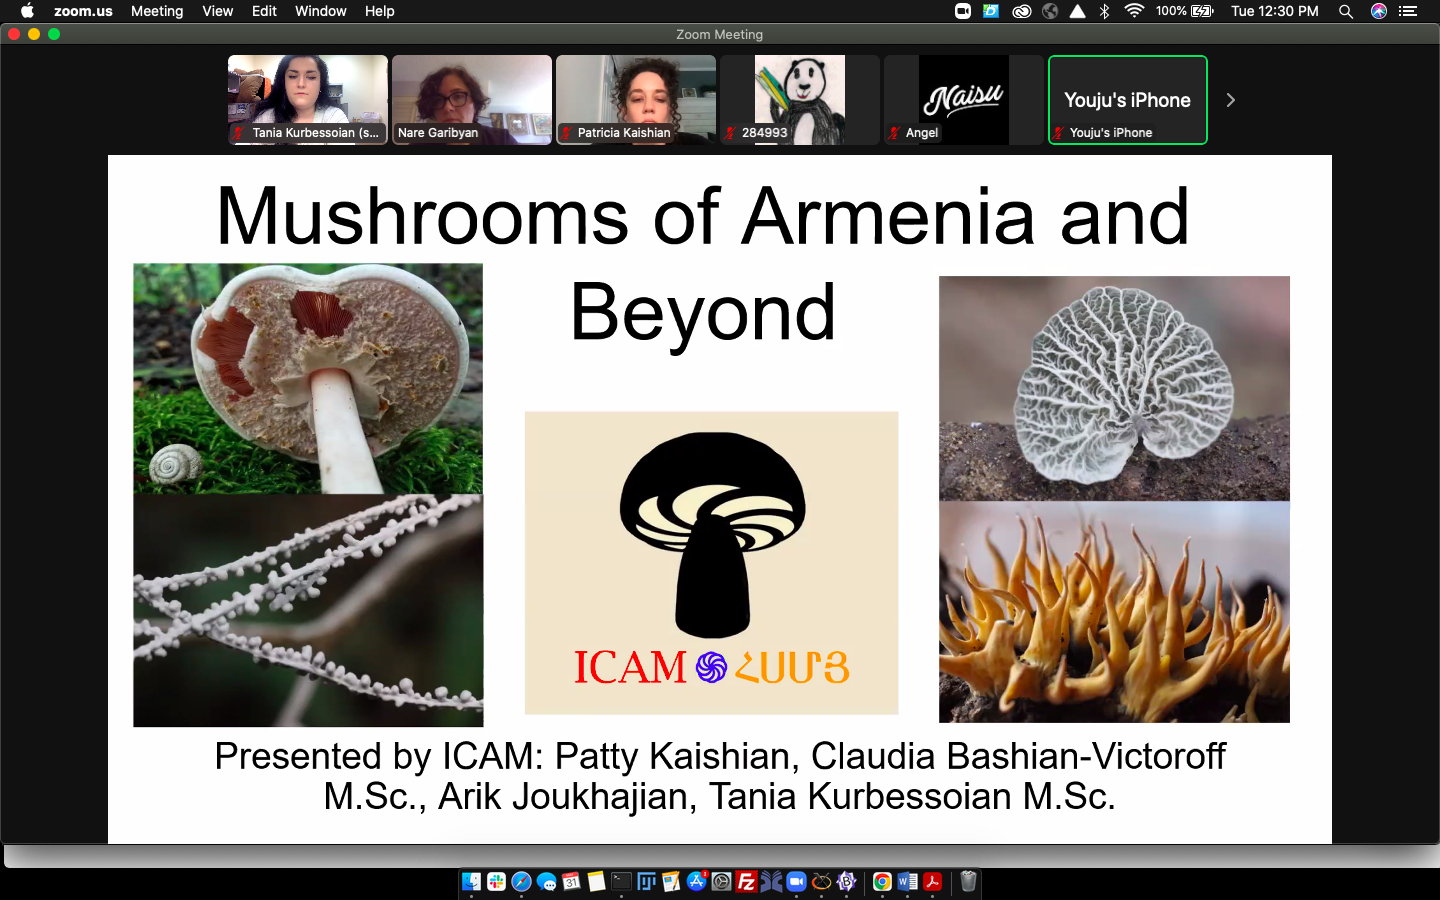 The founders of the International Congress of Armenian Mycologists presenting their work virtually to GCC Science Colloquium.